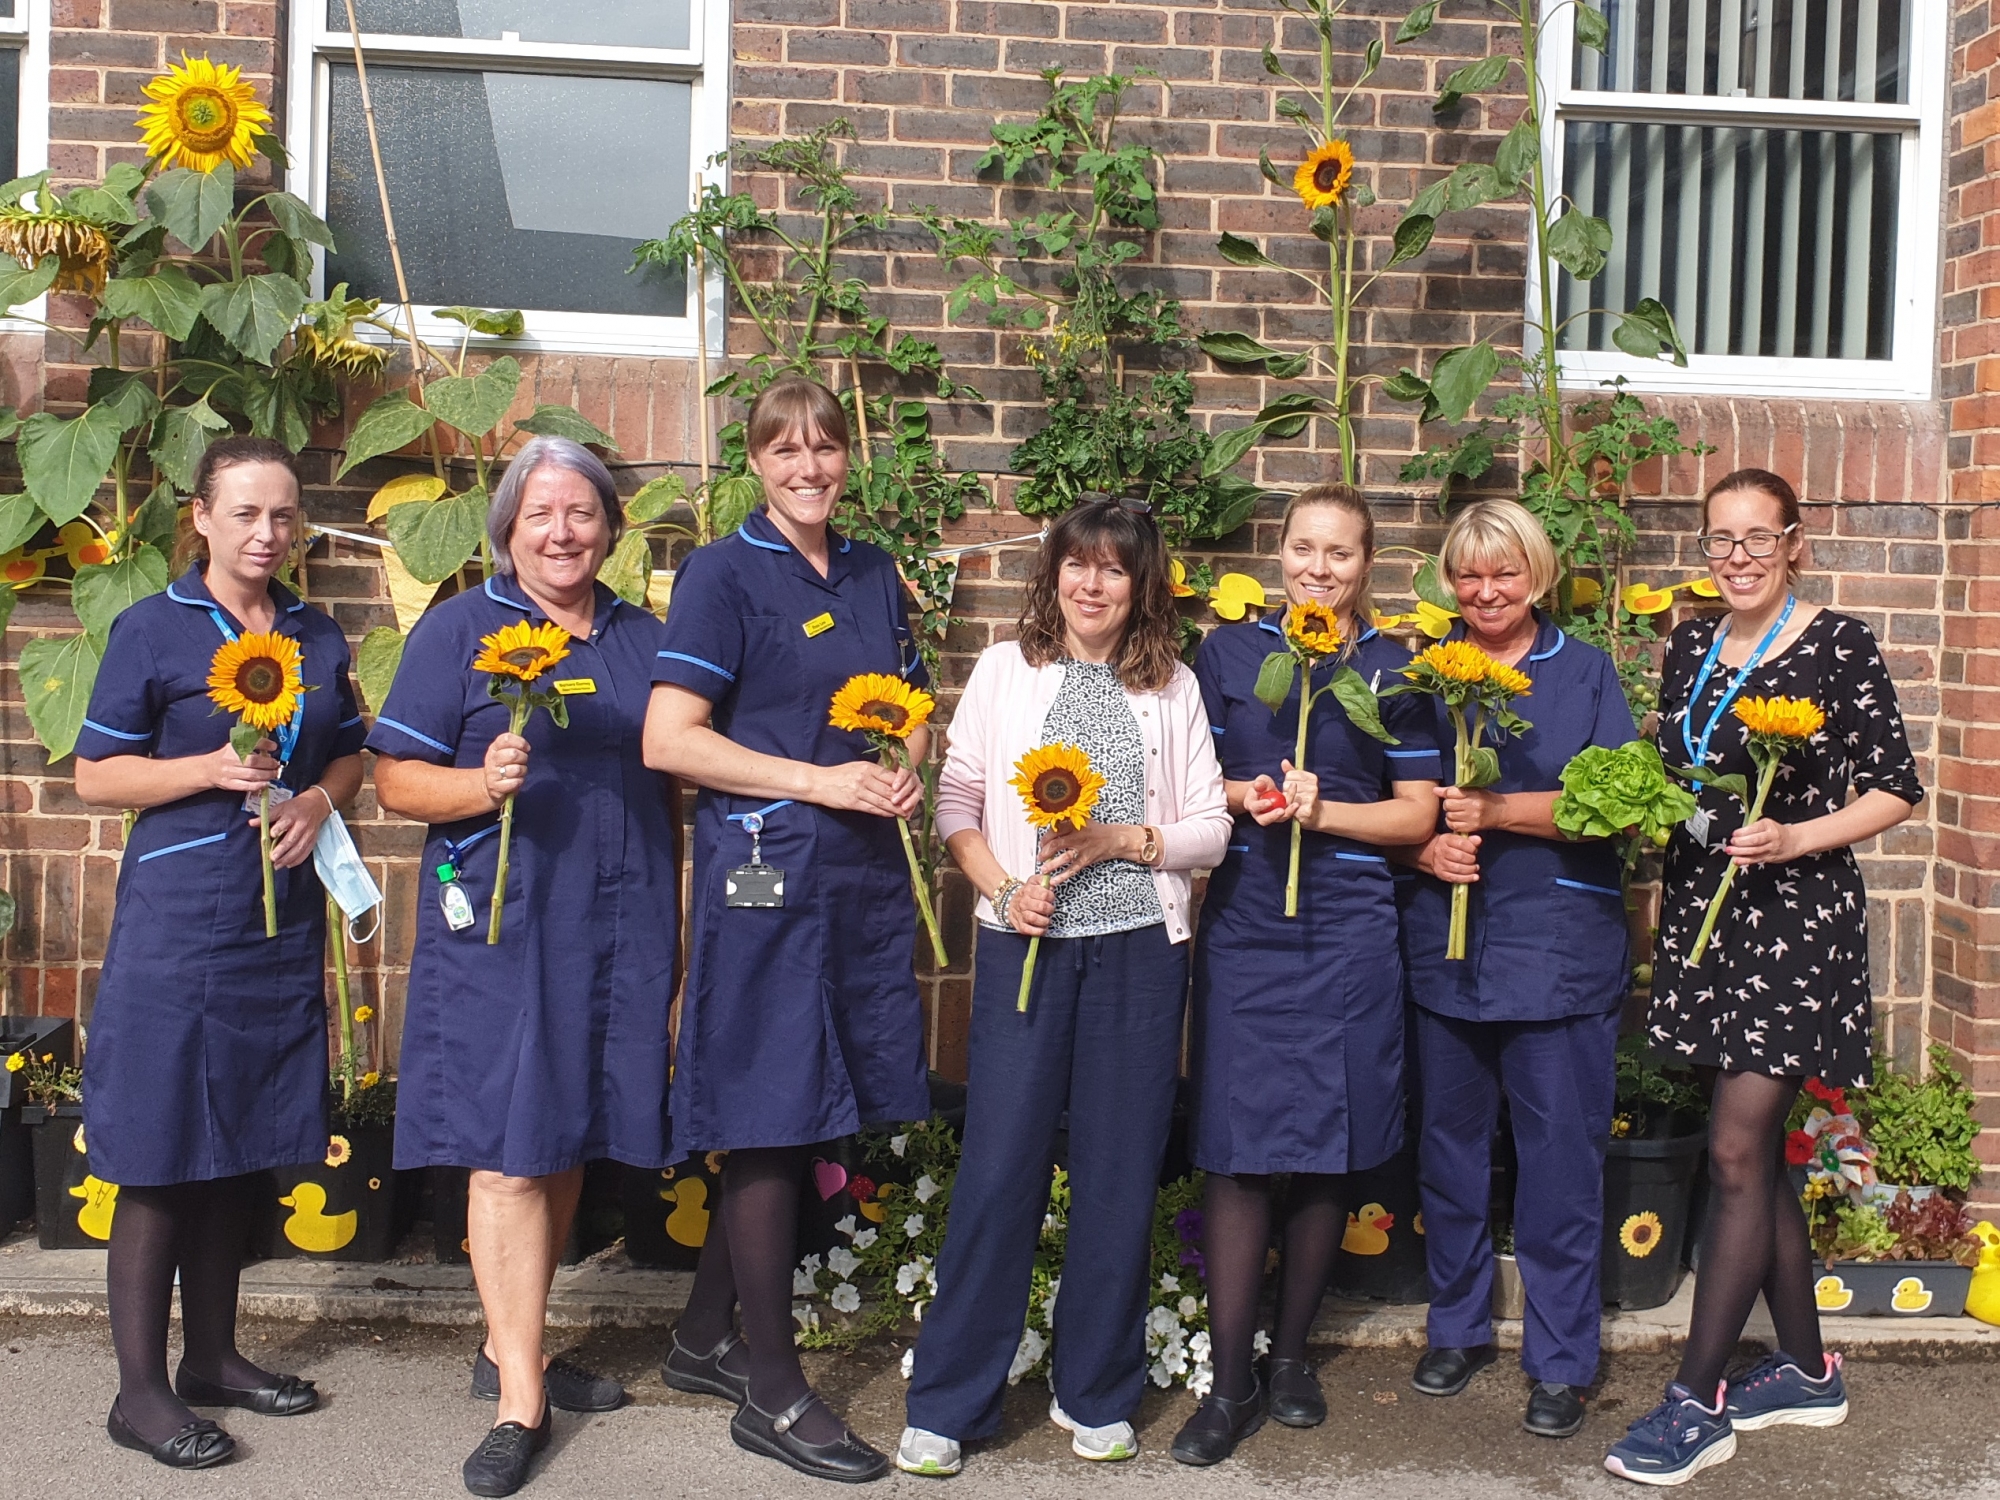 Heart Failure team from Clementhorpe Health Centre with competition sunflowers